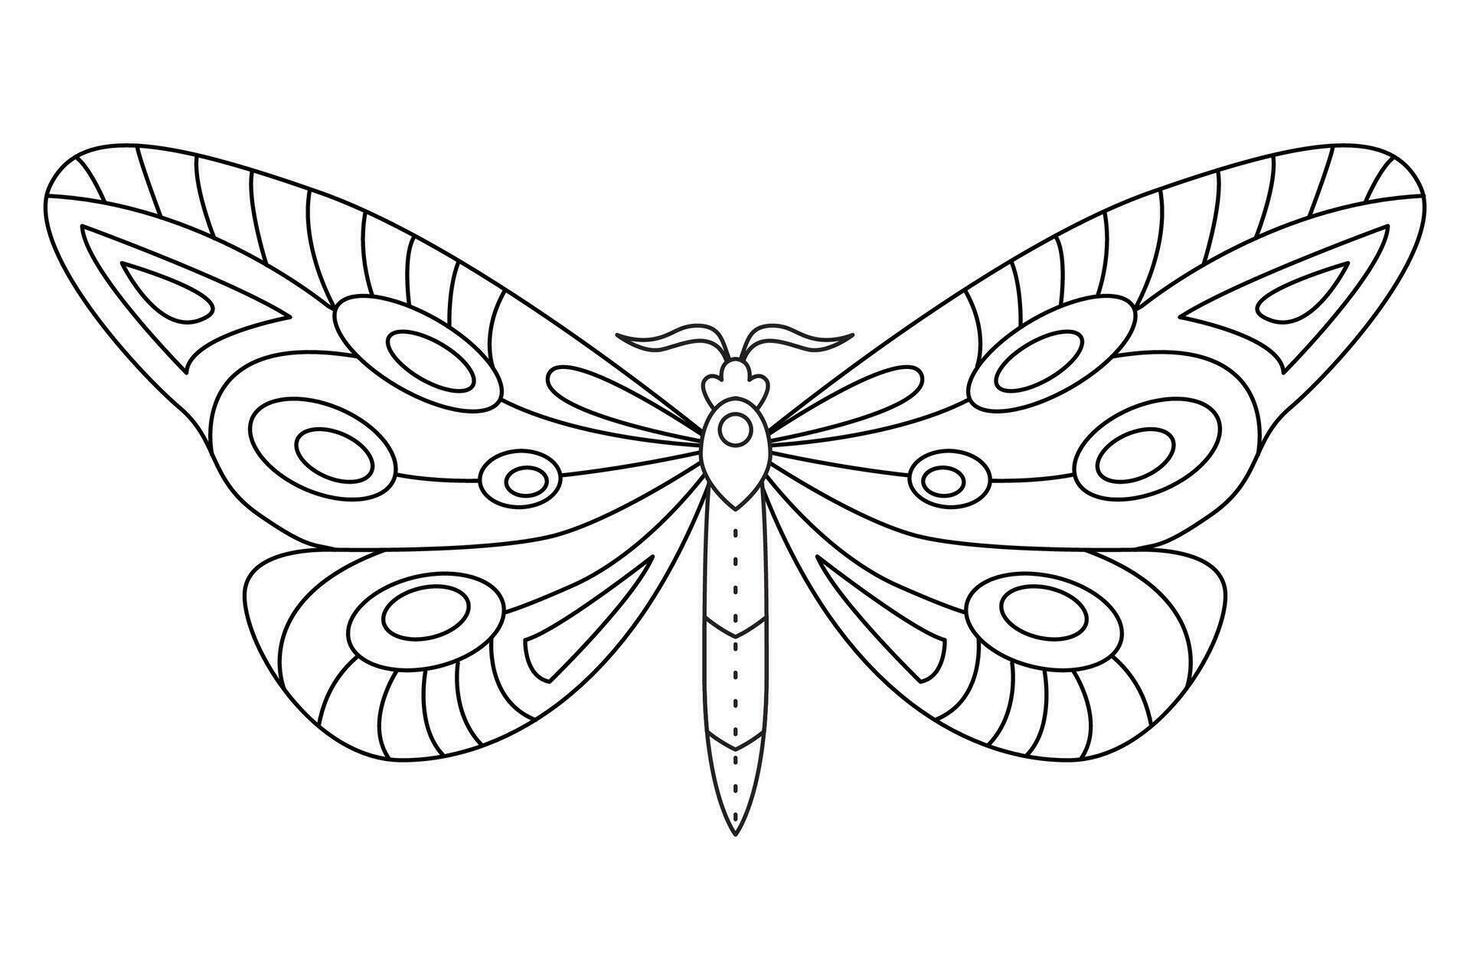 Butterfly black white isolated sketch illustration. Coloring page for kids and adults. vector